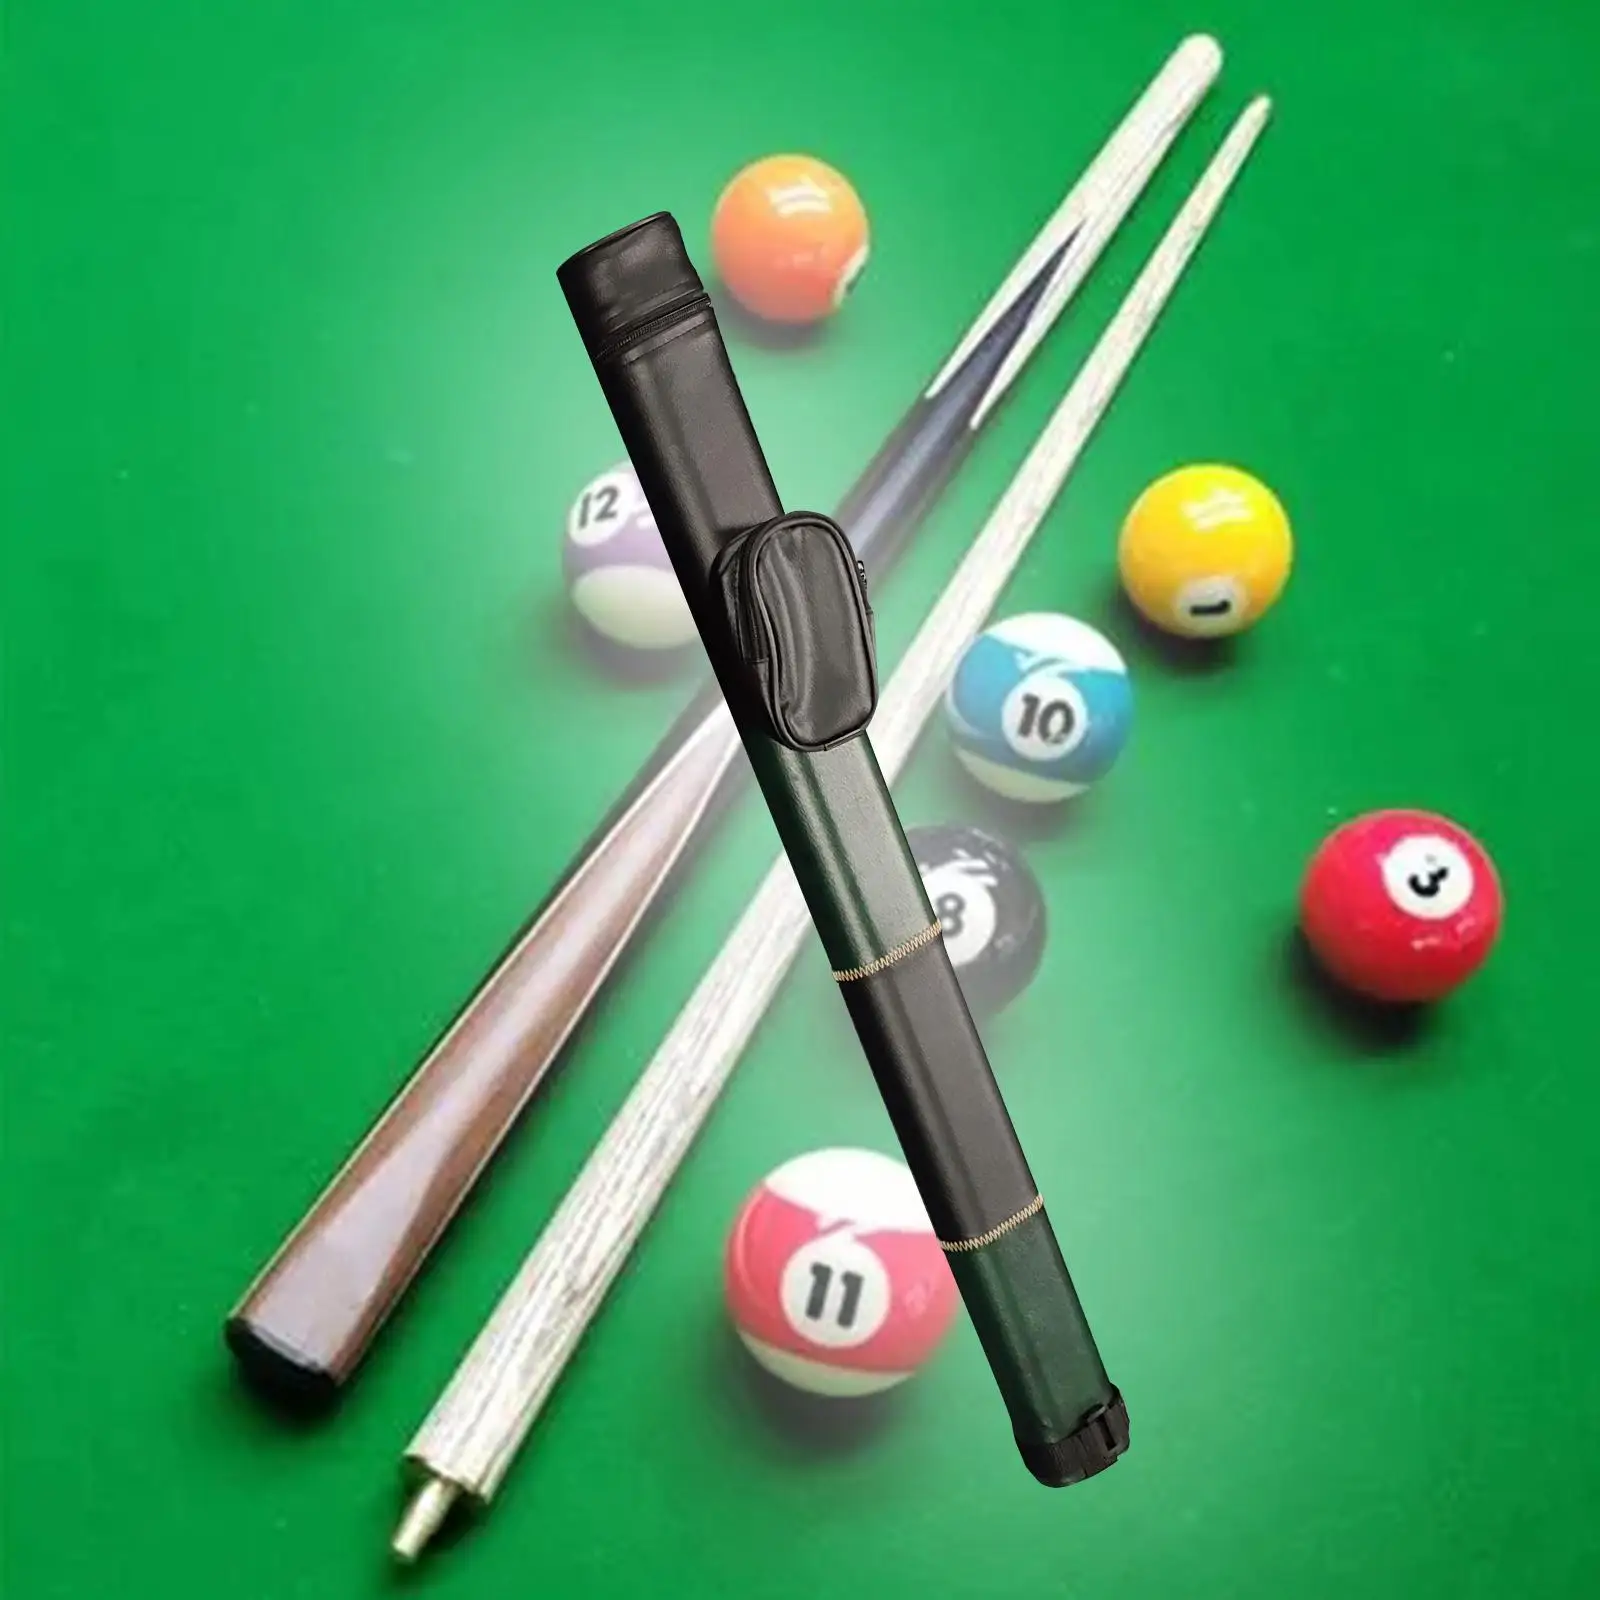 Billiards Pool Cue Case Durable with Zipper for Outdoor Travel Snooker Club